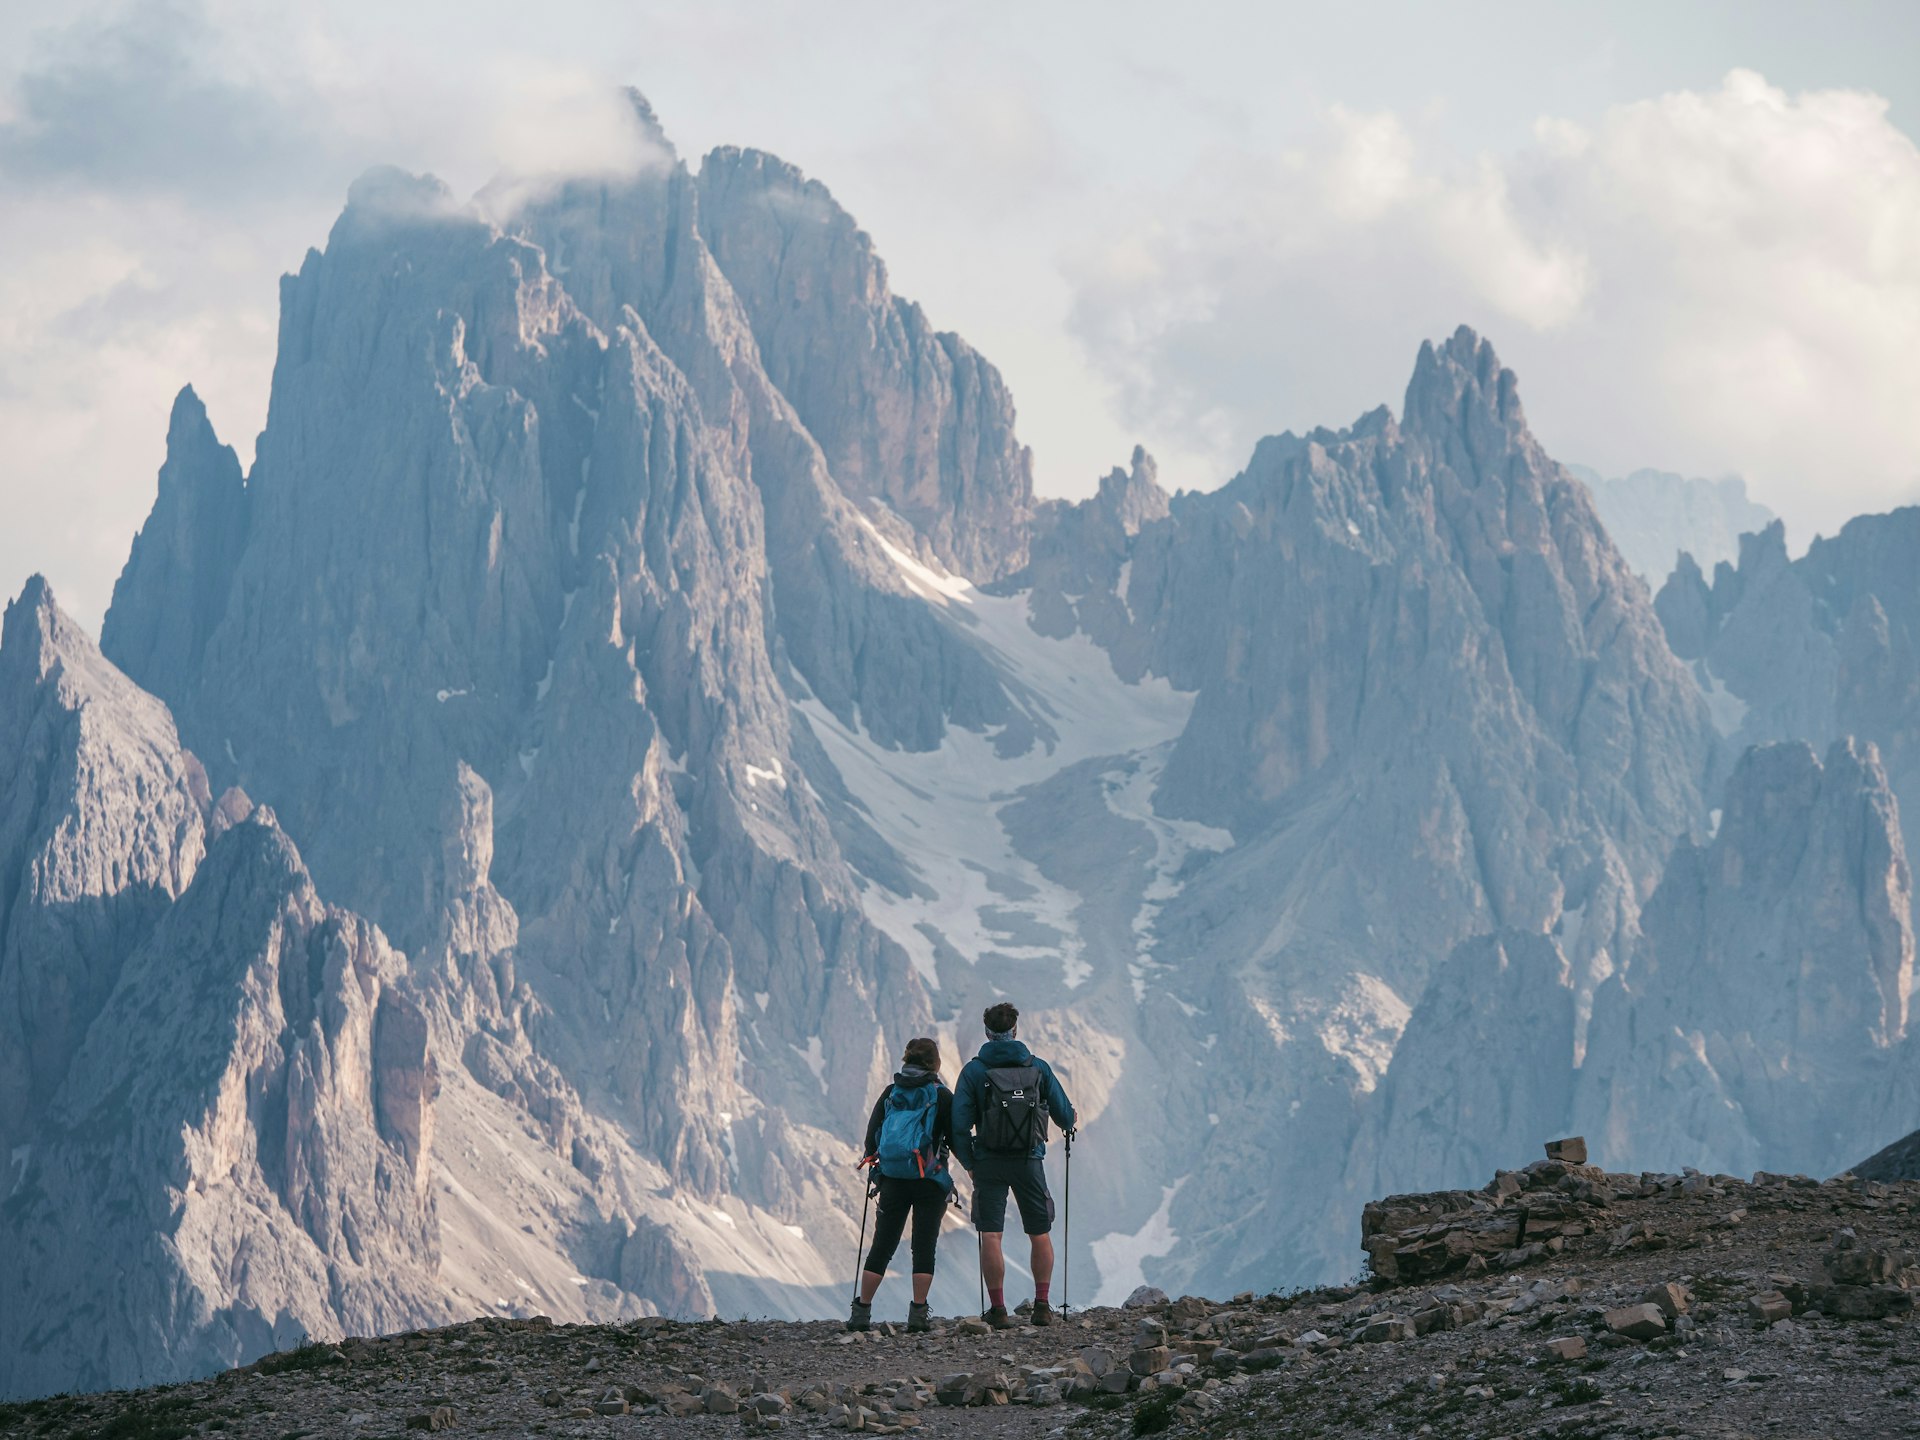 Two hikers stand and admire the jagged peaks of Cadini di Misurina mountains in Dolomites, Italy